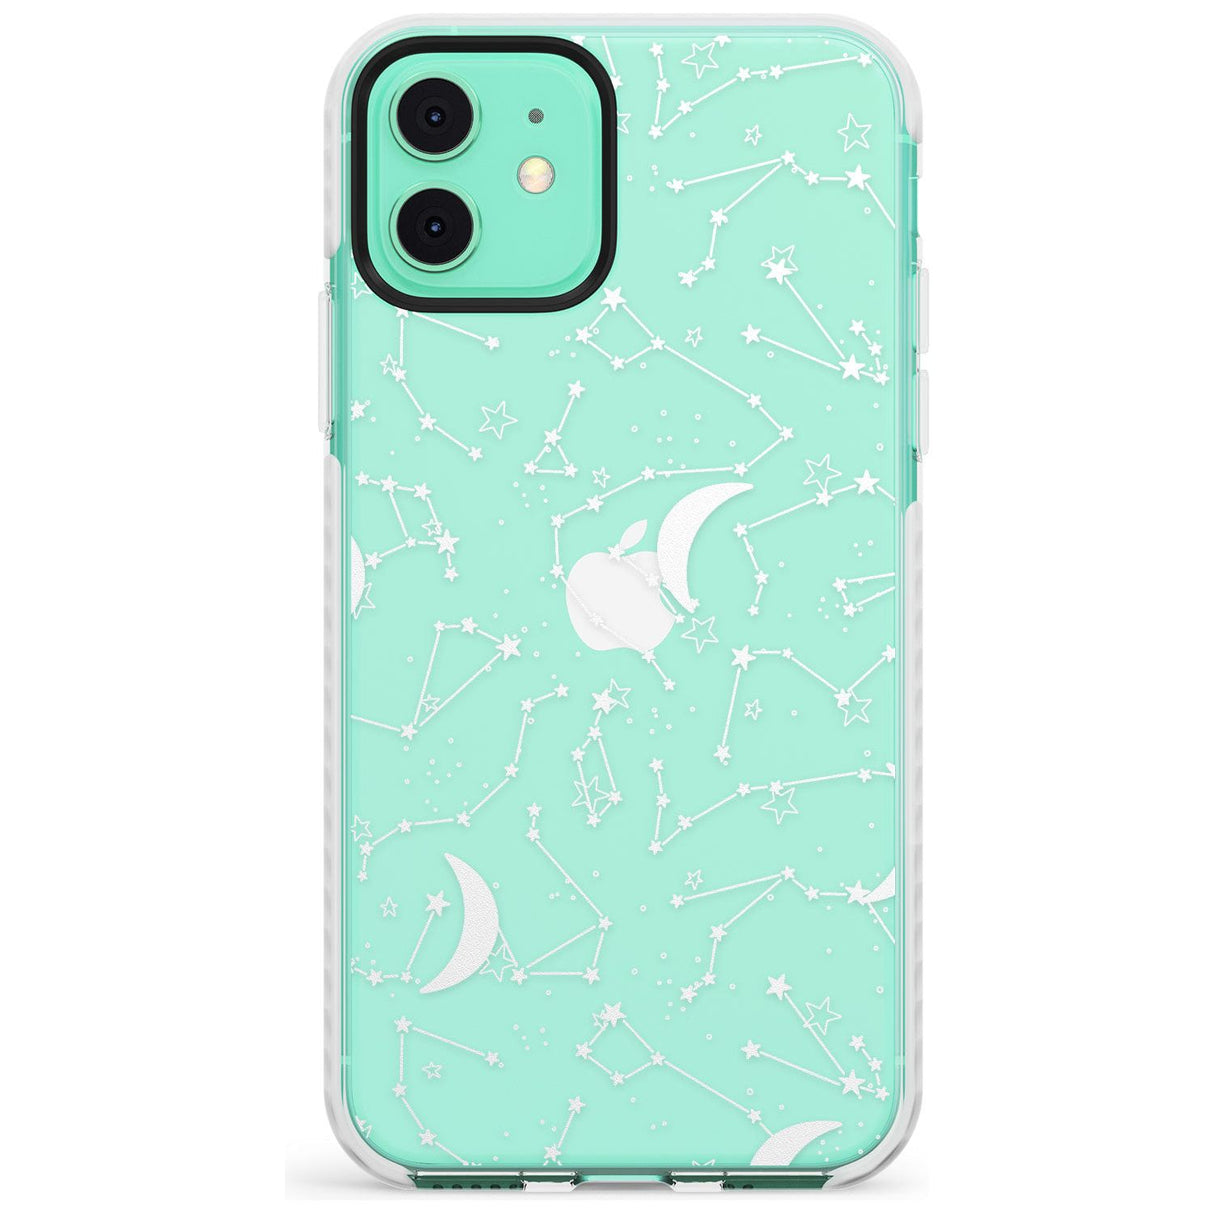 White Constellations on Clear Slim TPU Phone Case for iPhone 11